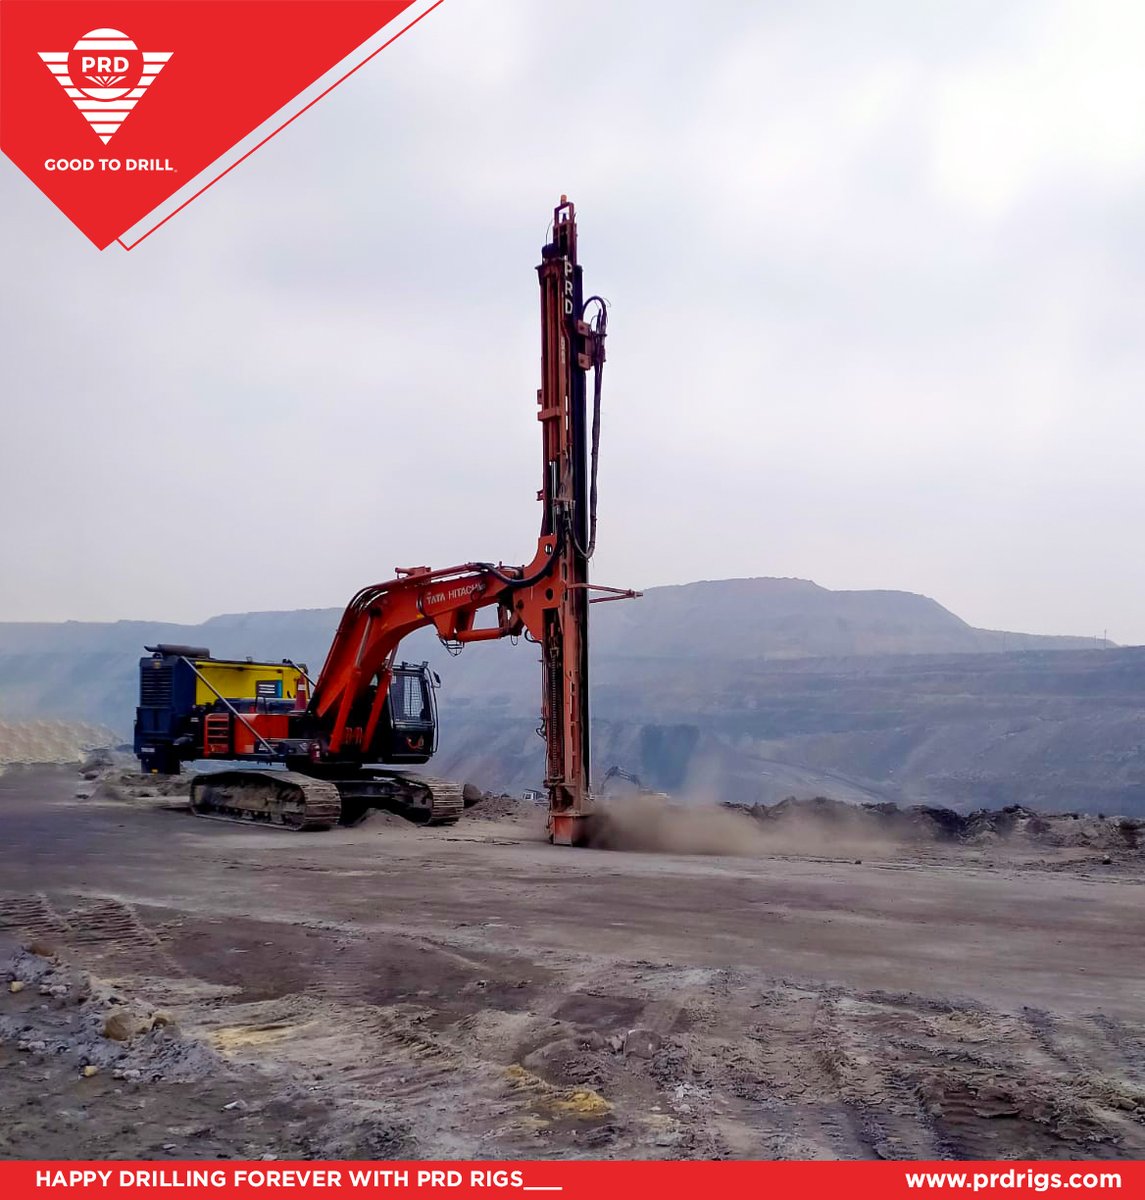 PRD EX 65 in Action! Witness the #Excavator-Mounted Blast Hole Drill #Rig conquering new frontiers at Ambikapur, Chhattisgarh site.

Know more: prdrigs.com

#prd #india #Mining #DrillingCommunity #BlastHoleDrilling #mine #mines #MiningEquipment #ExcavatorAttachment